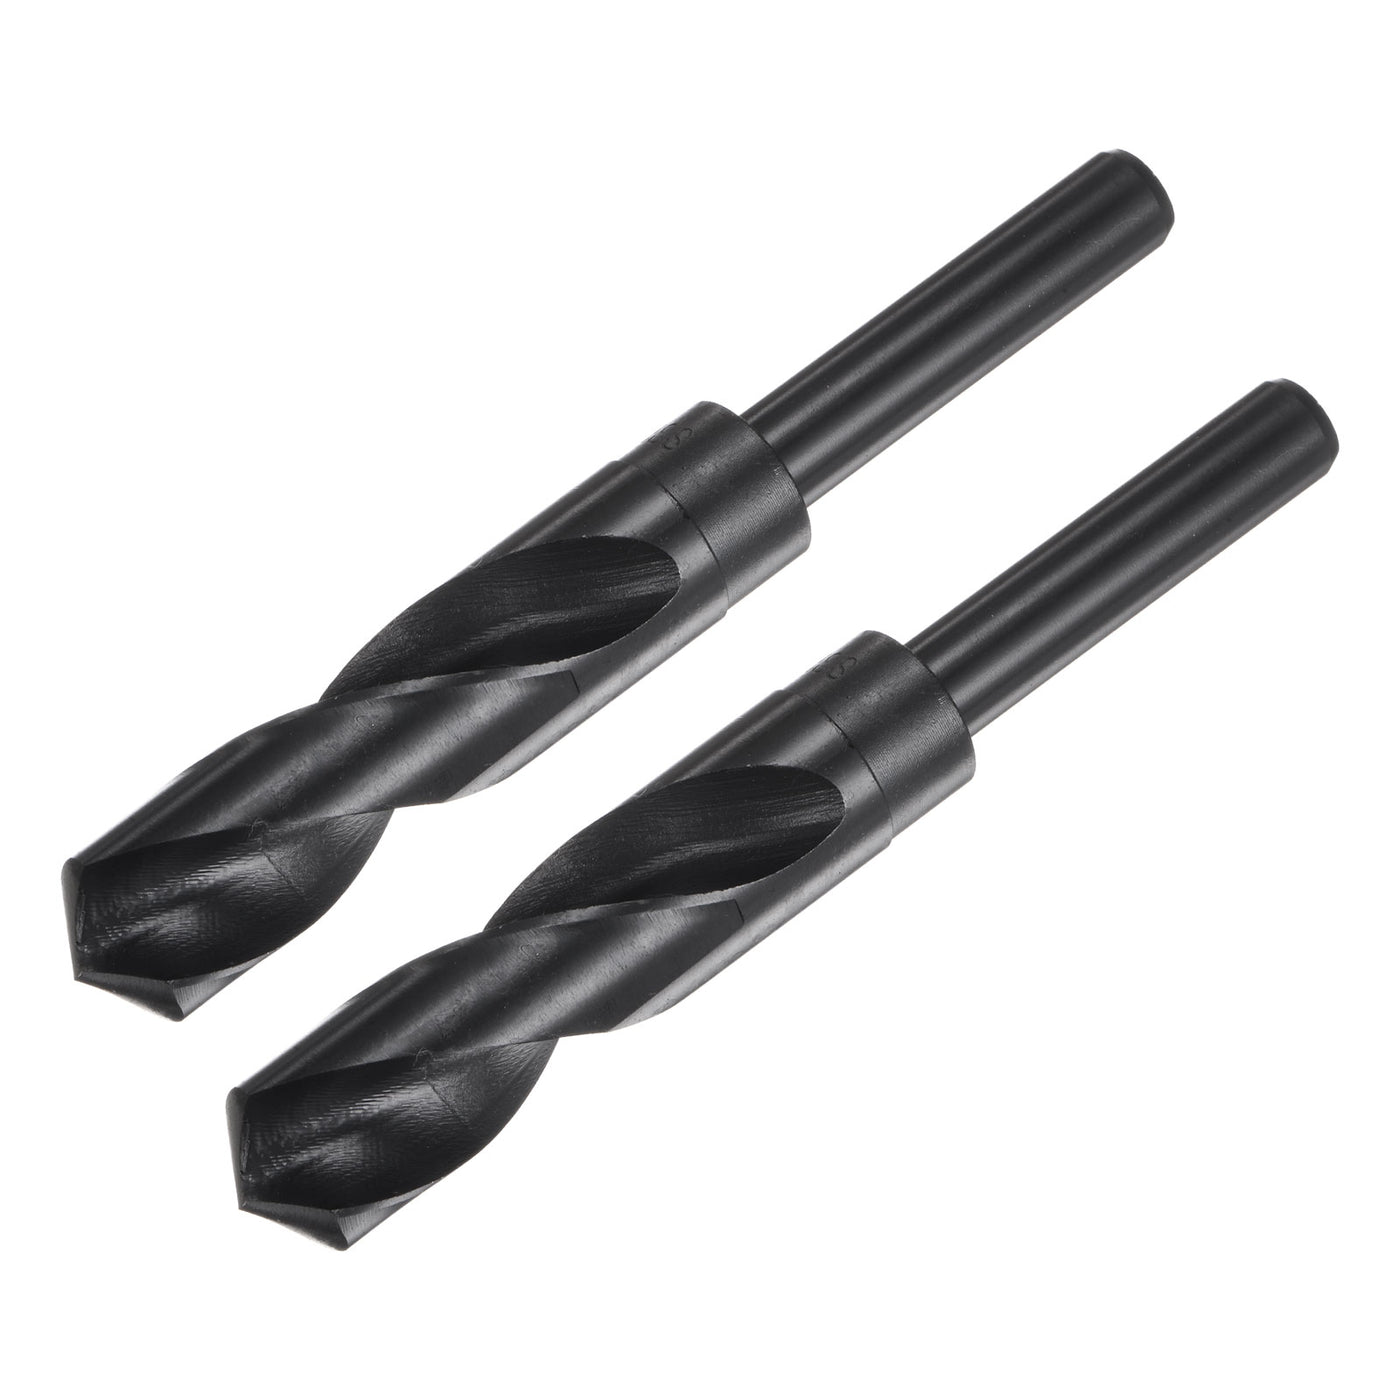 uxcell Uxcell 2pcs 21mm Black Oxide High Speed Steel HSS 9341 1/2" Reduced Shank Drill Bits